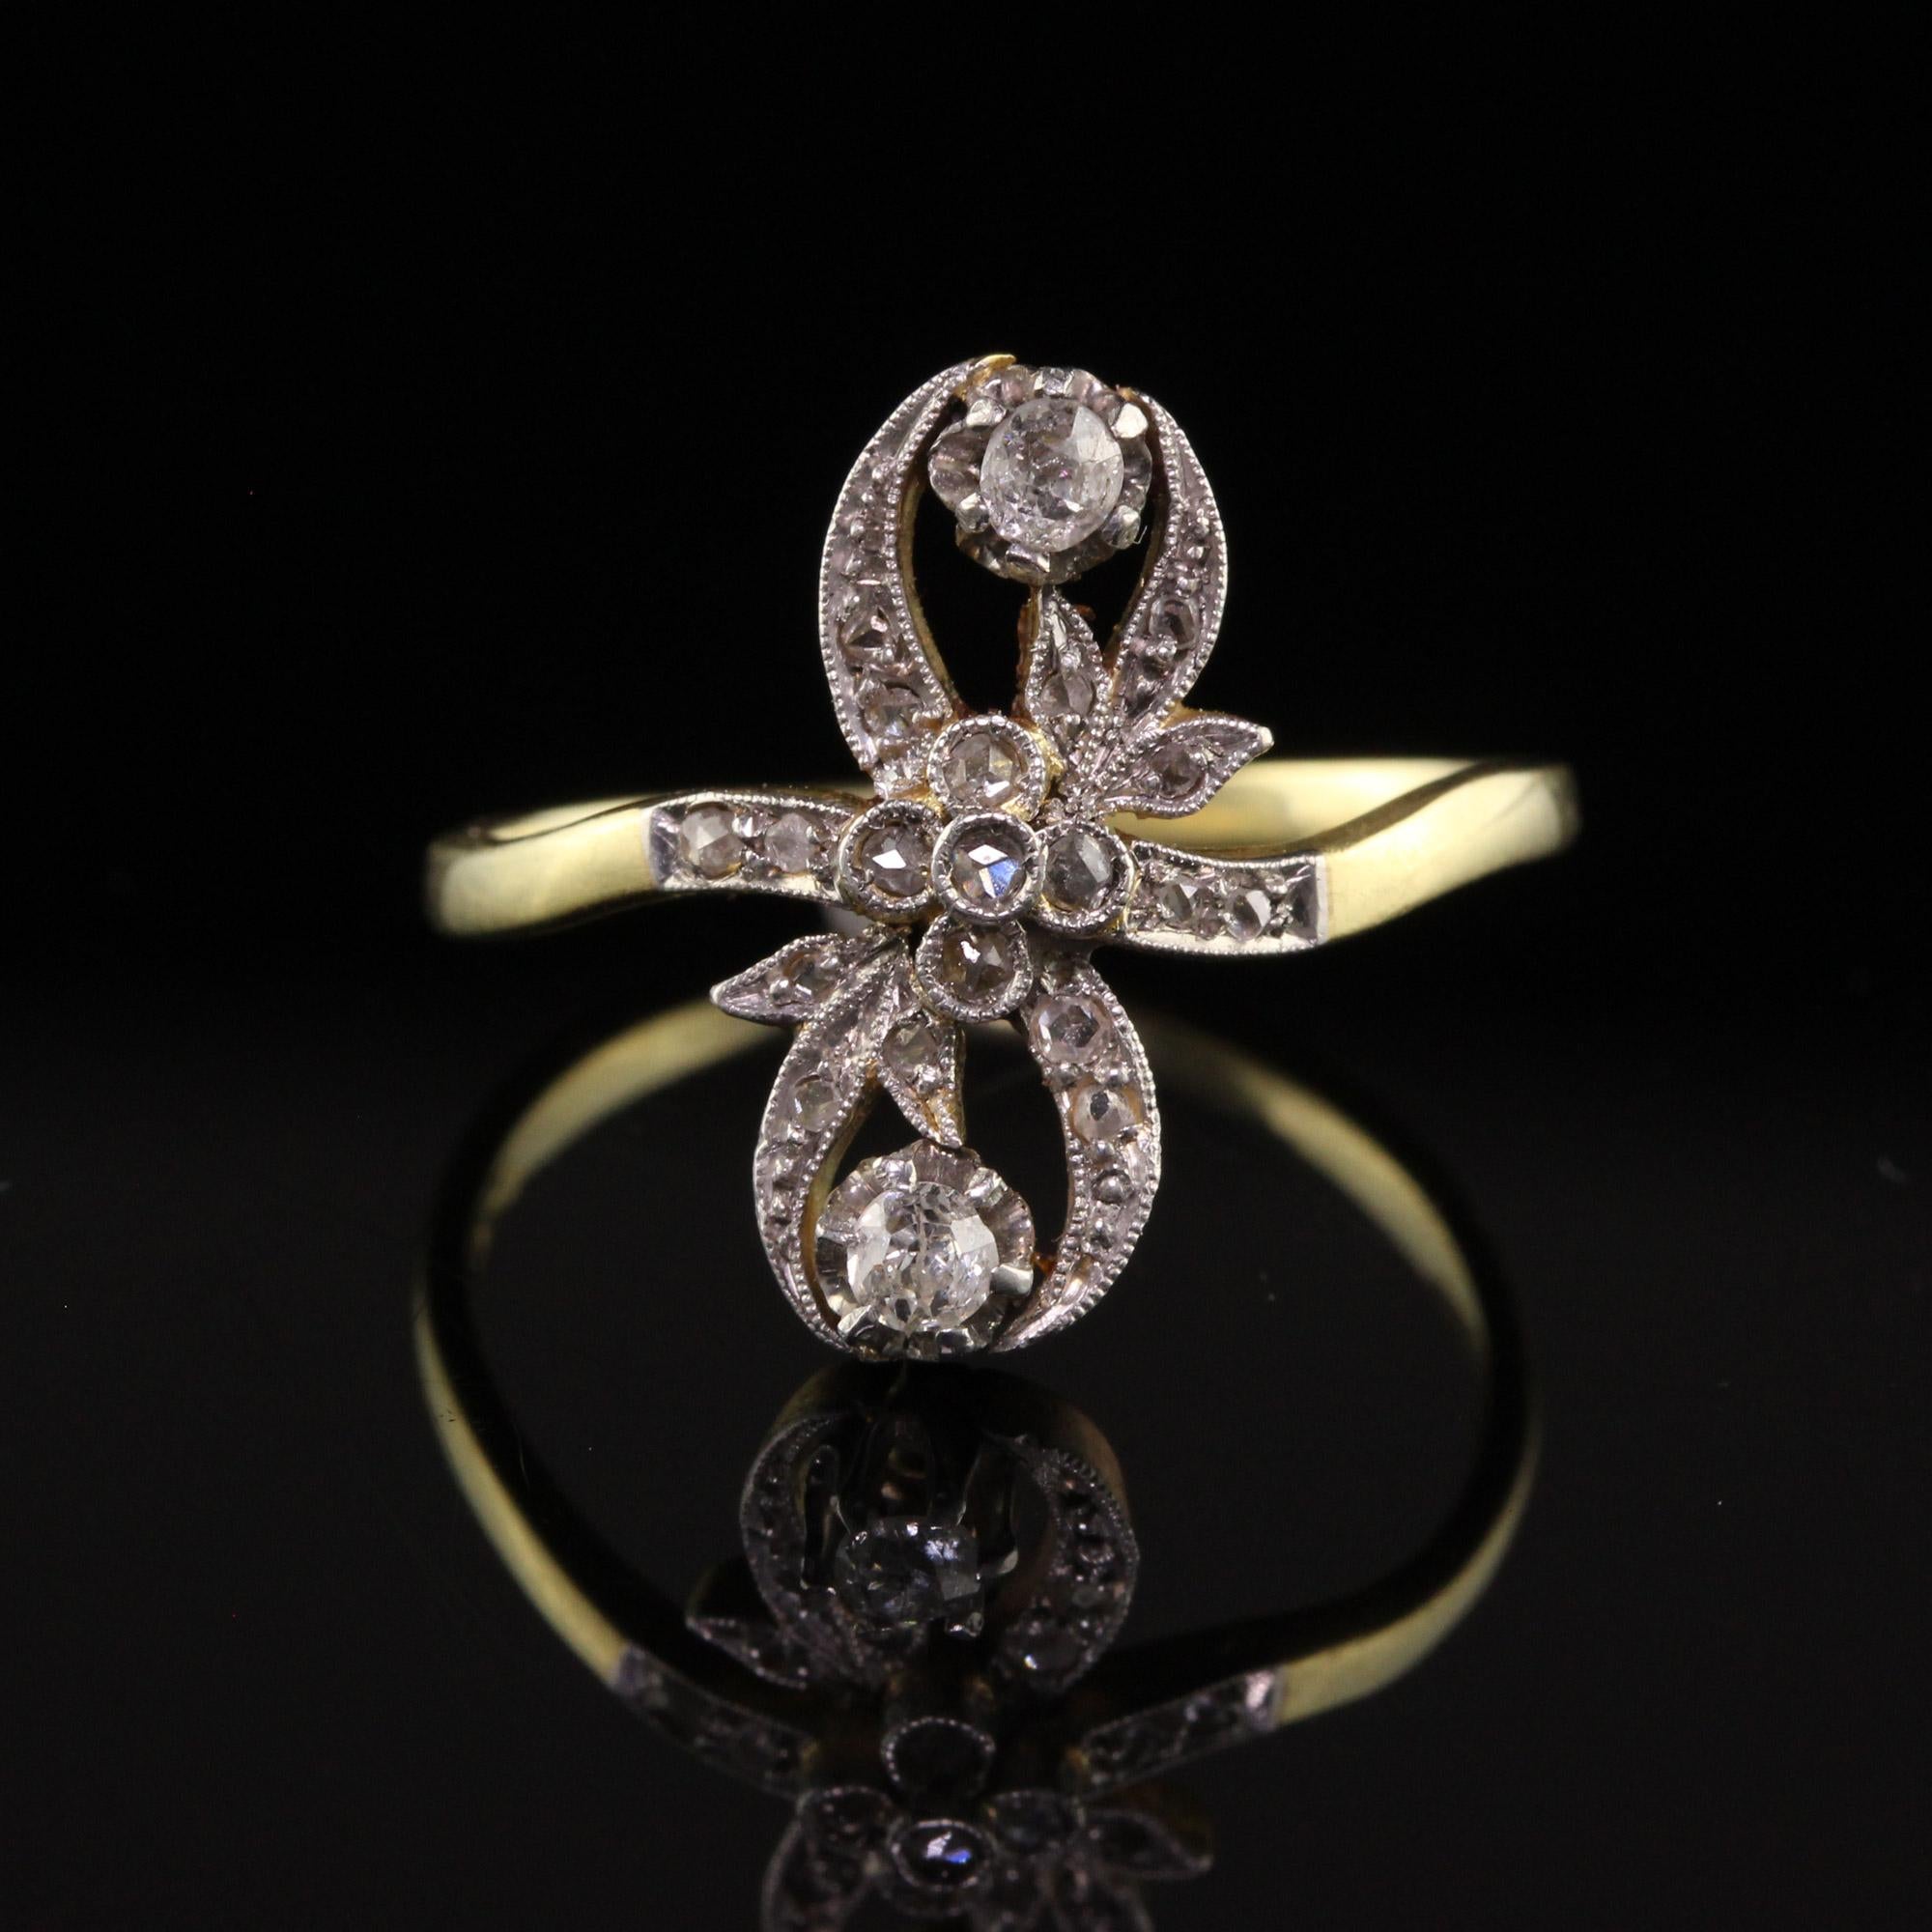 Antique Edwardian 18k Yellow Gold Platinum Top Floral Diamond Ring In Good Condition For Sale In Great Neck, NY